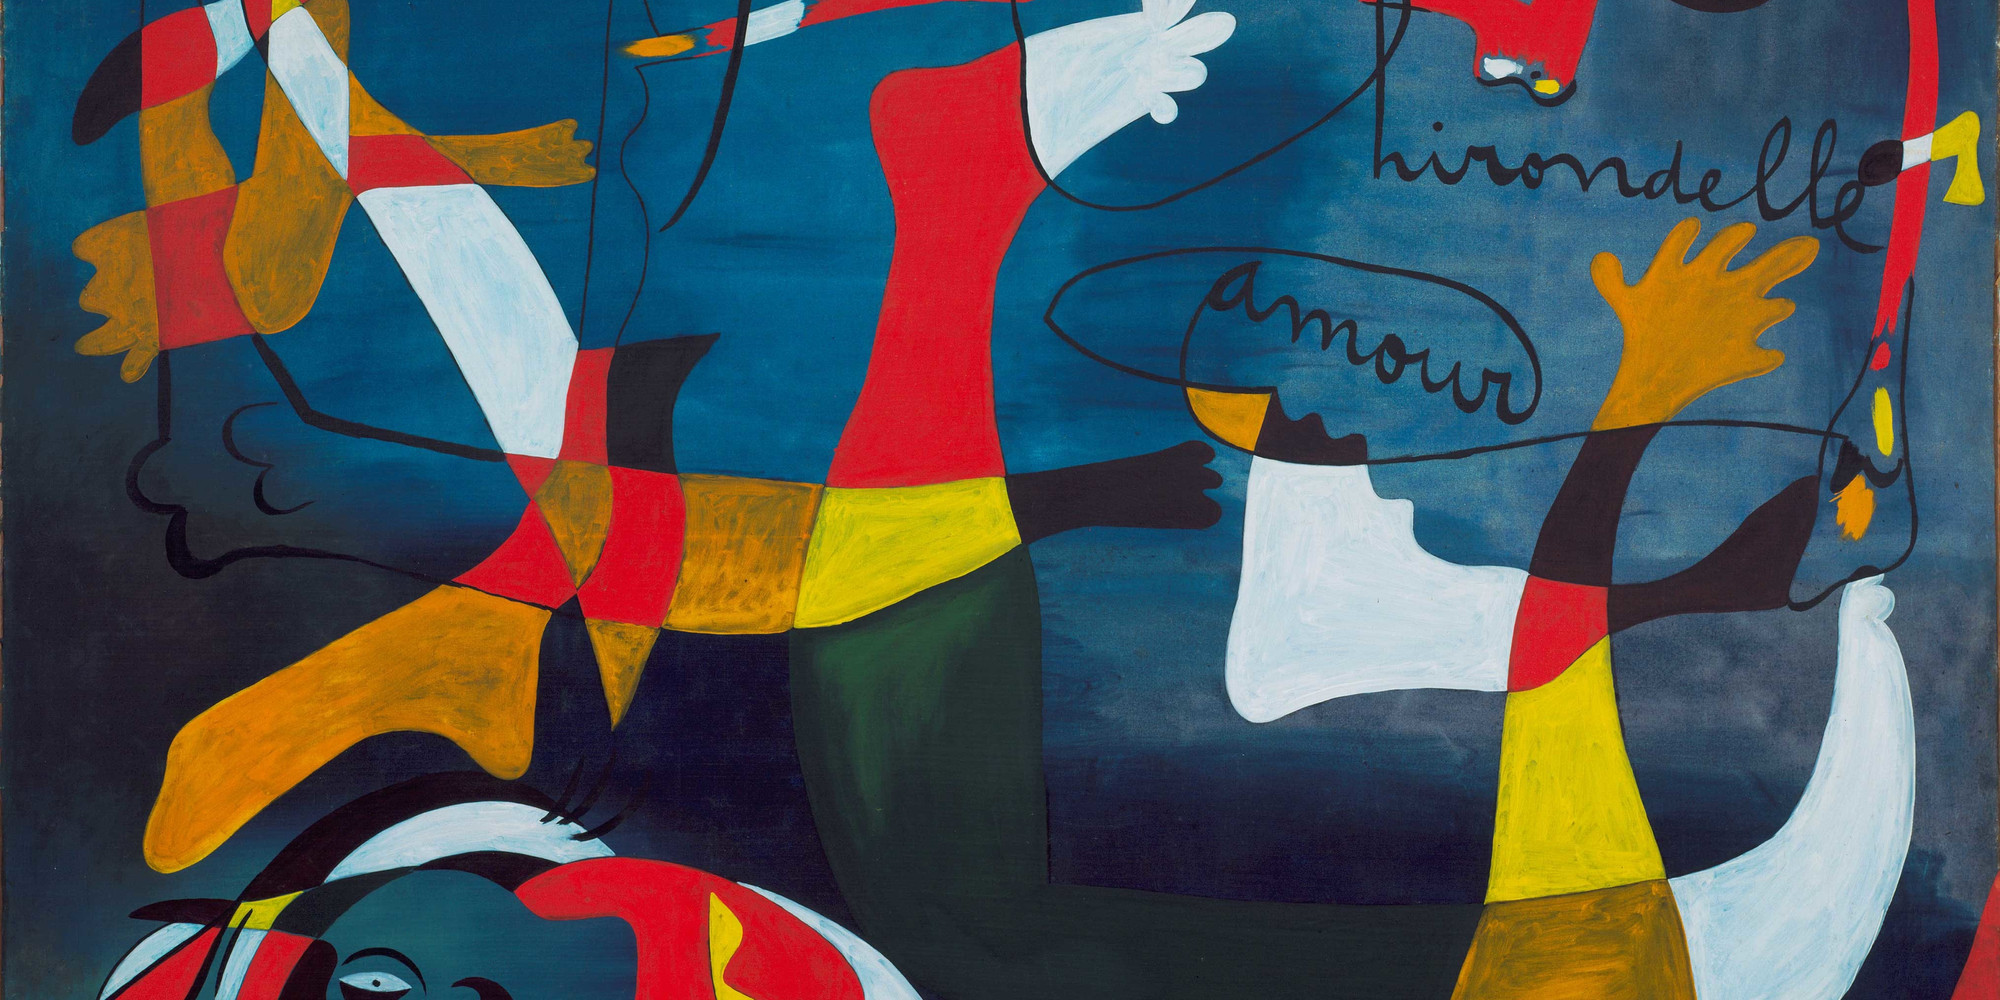 Joan Miró. “Hirondelle Amour”. 1933–34. Oil on canvas, 6&#39; 6 1/2&#34; × 8&#39; 1 1/2&#34; (199.3 × 247.6 cm). Gift of Nelson A. Rockefeller. © 2019 Successió Miró/Artists Rights Society (ARS), New York/ADAGP, Paris